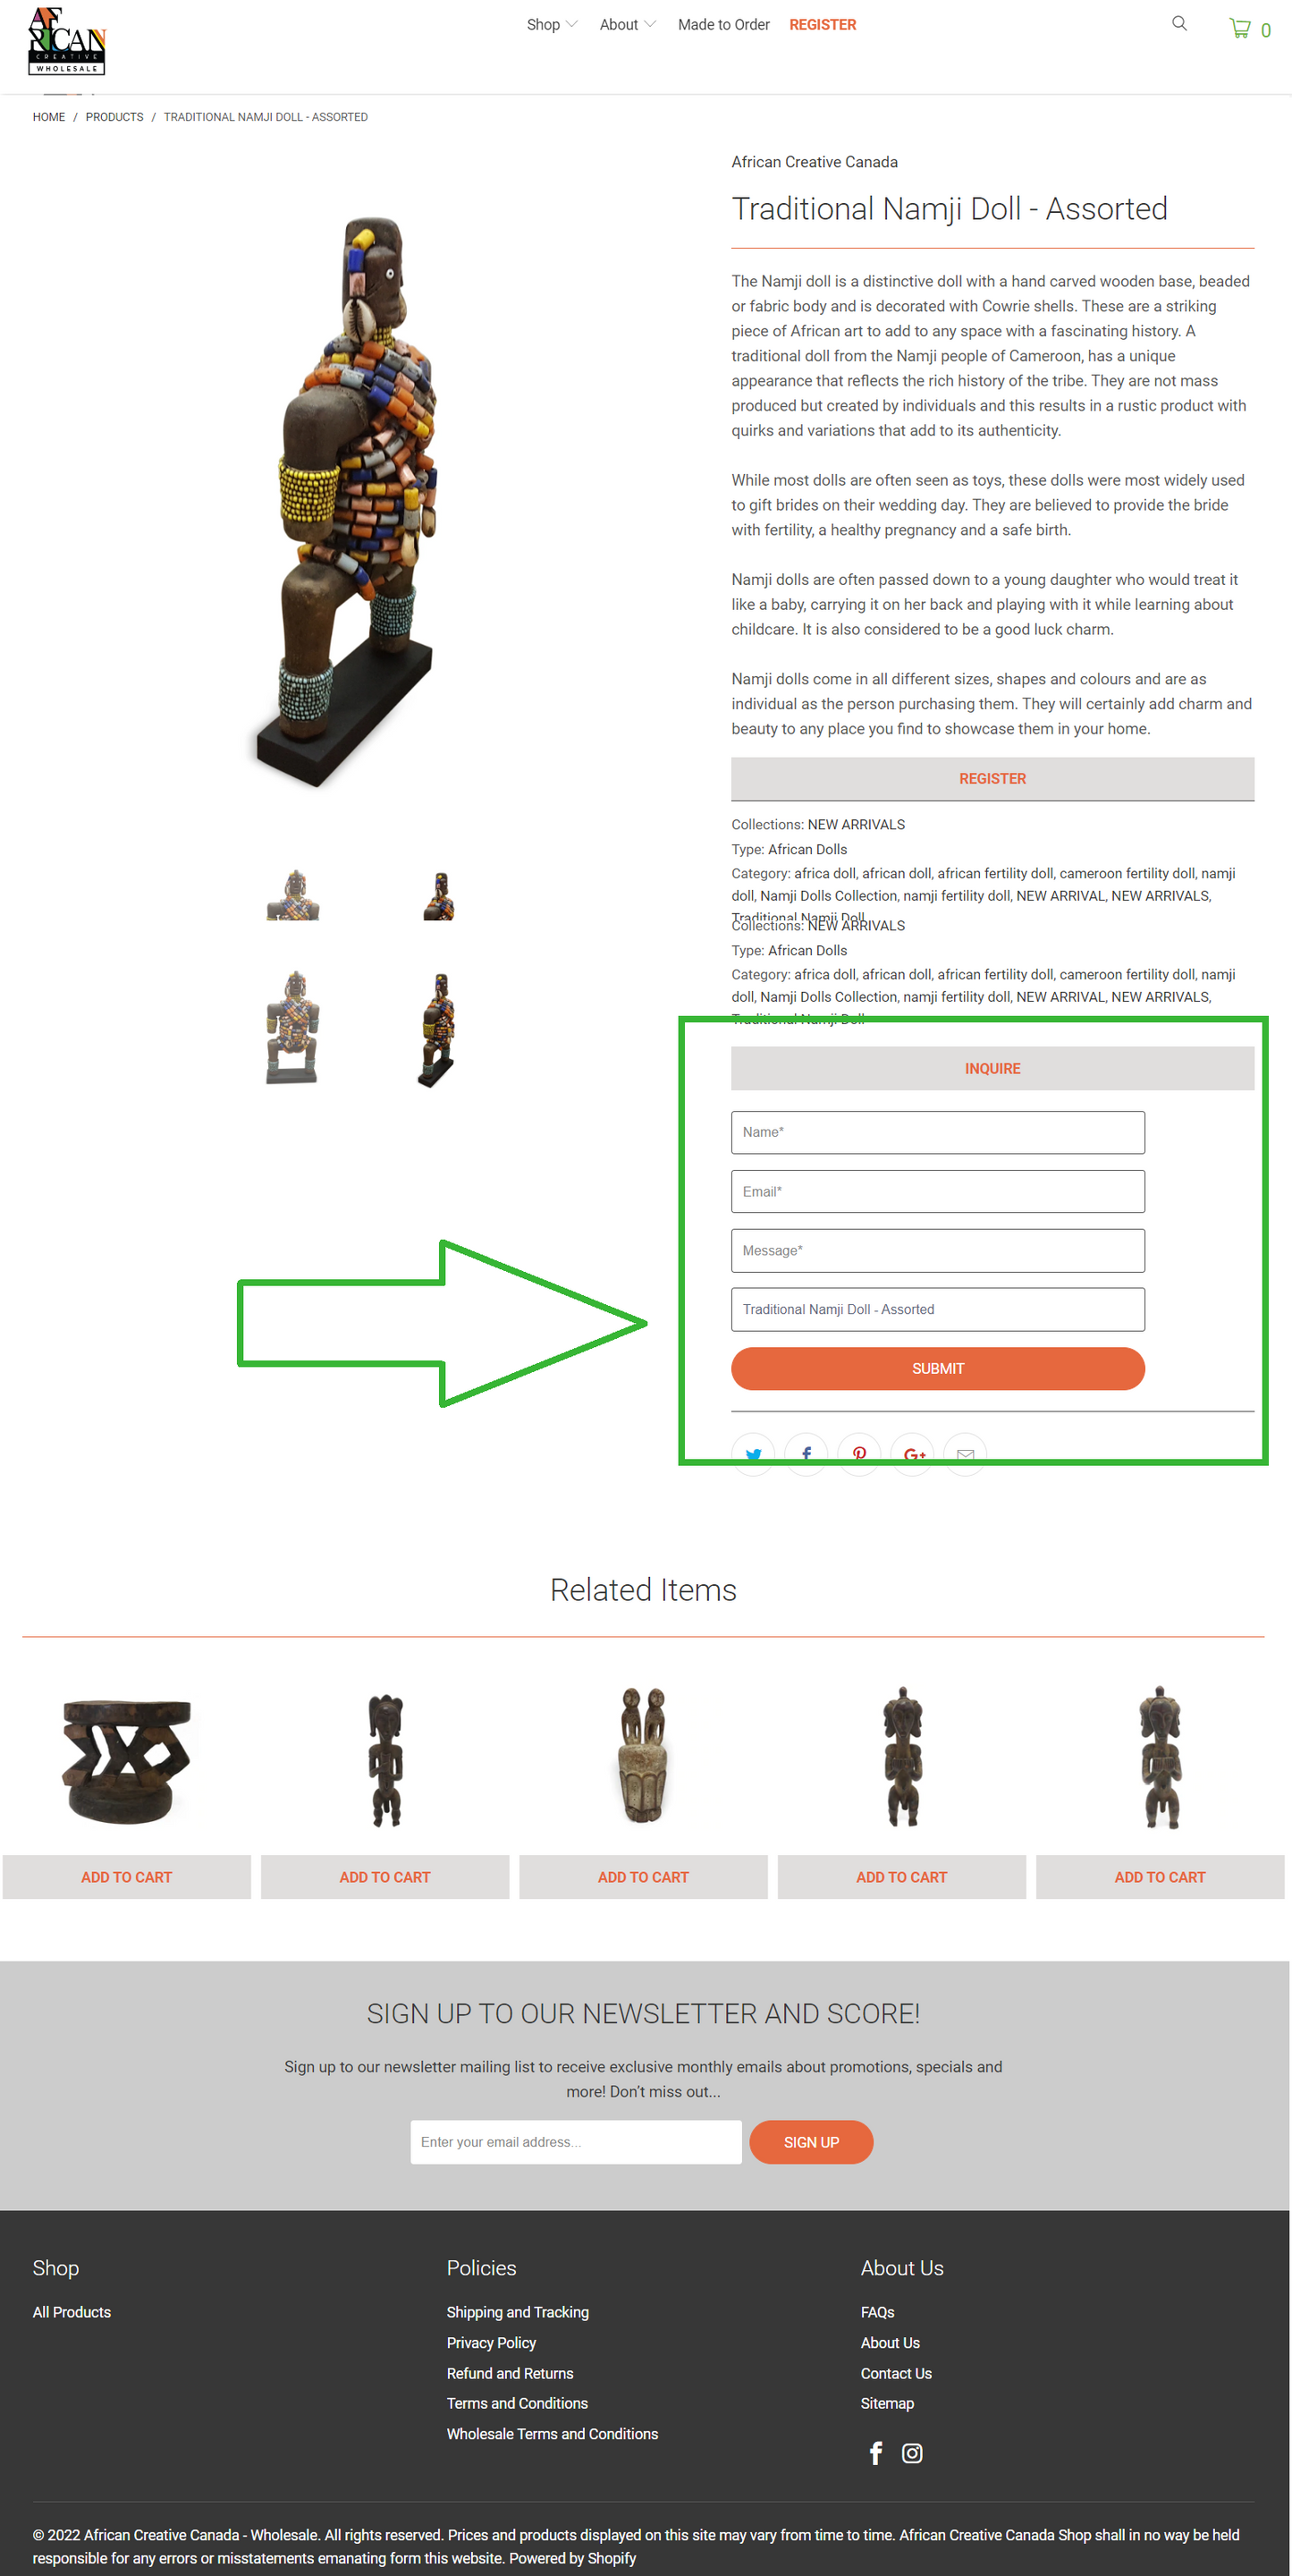 Shopify wholesale store - Product inquiry form - 2021